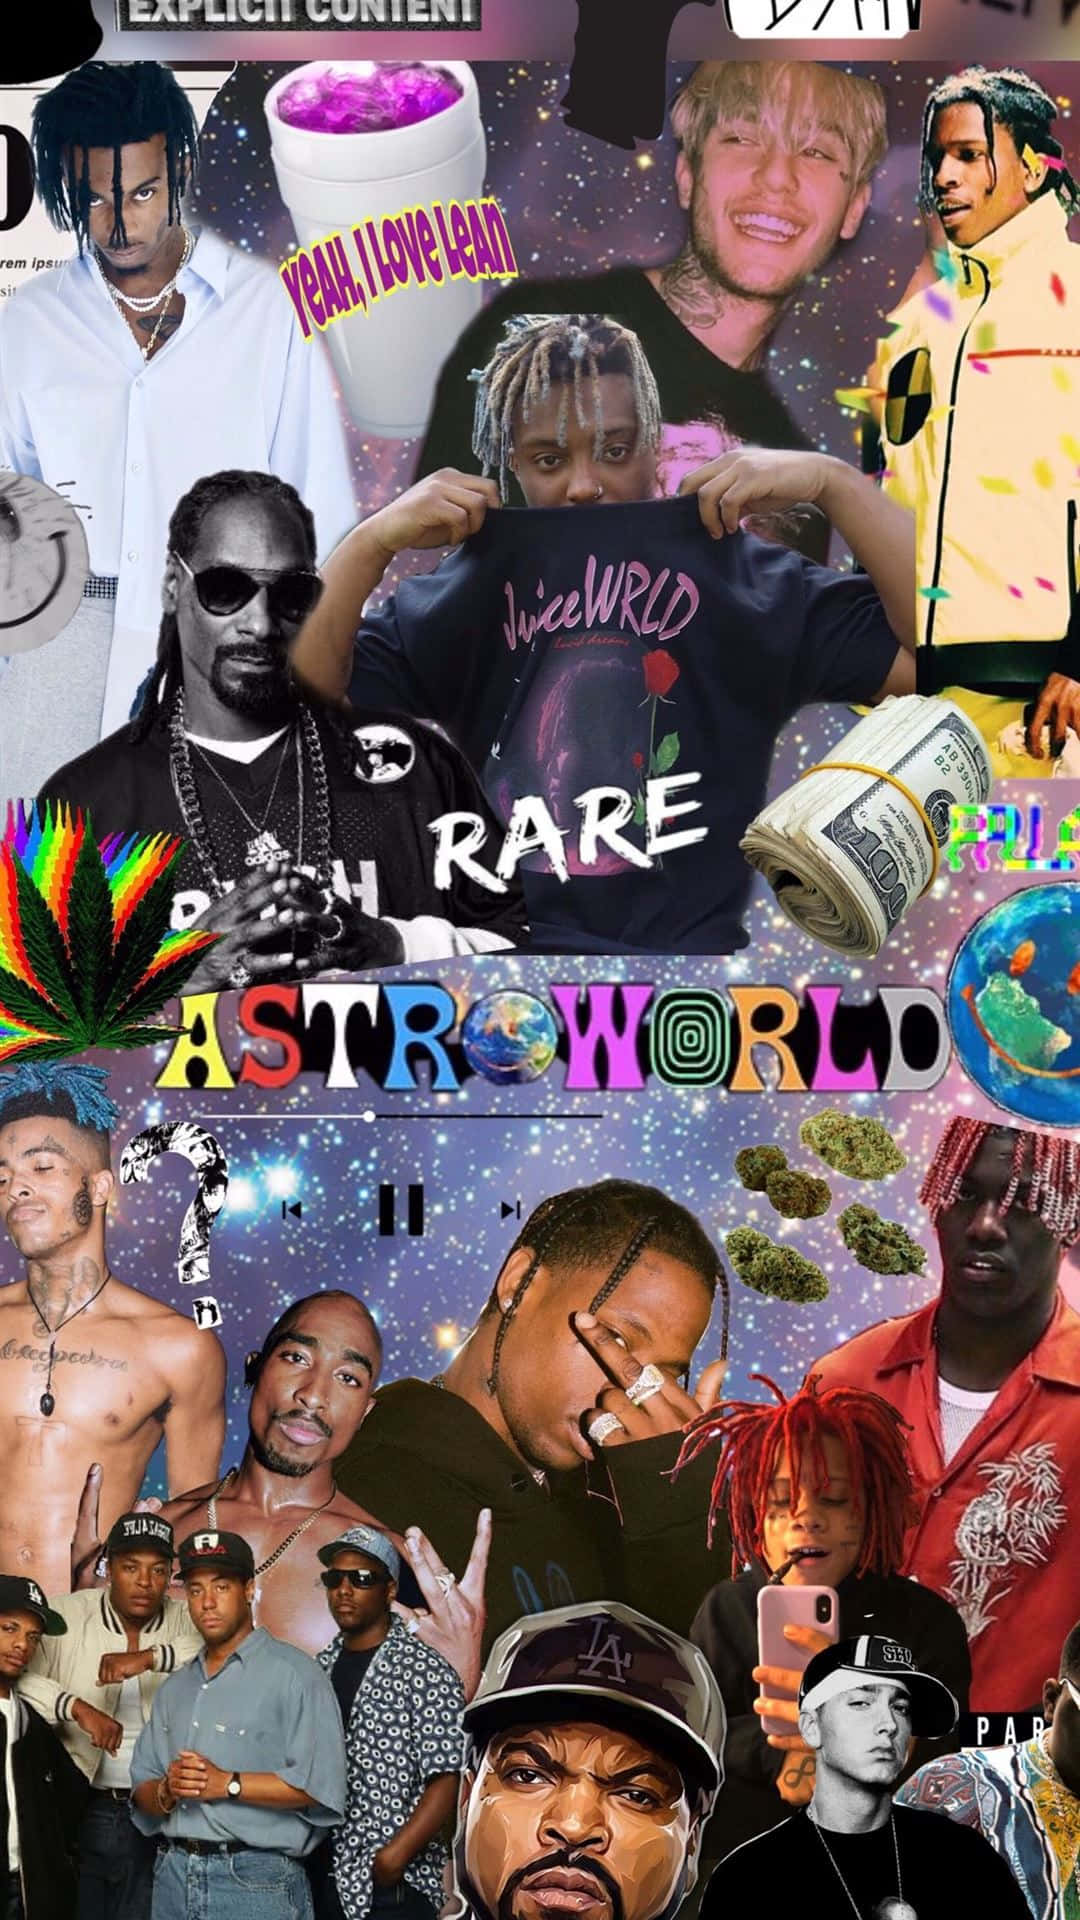 self made rapper collage wallpaper pt2  rhiphopwallpapers